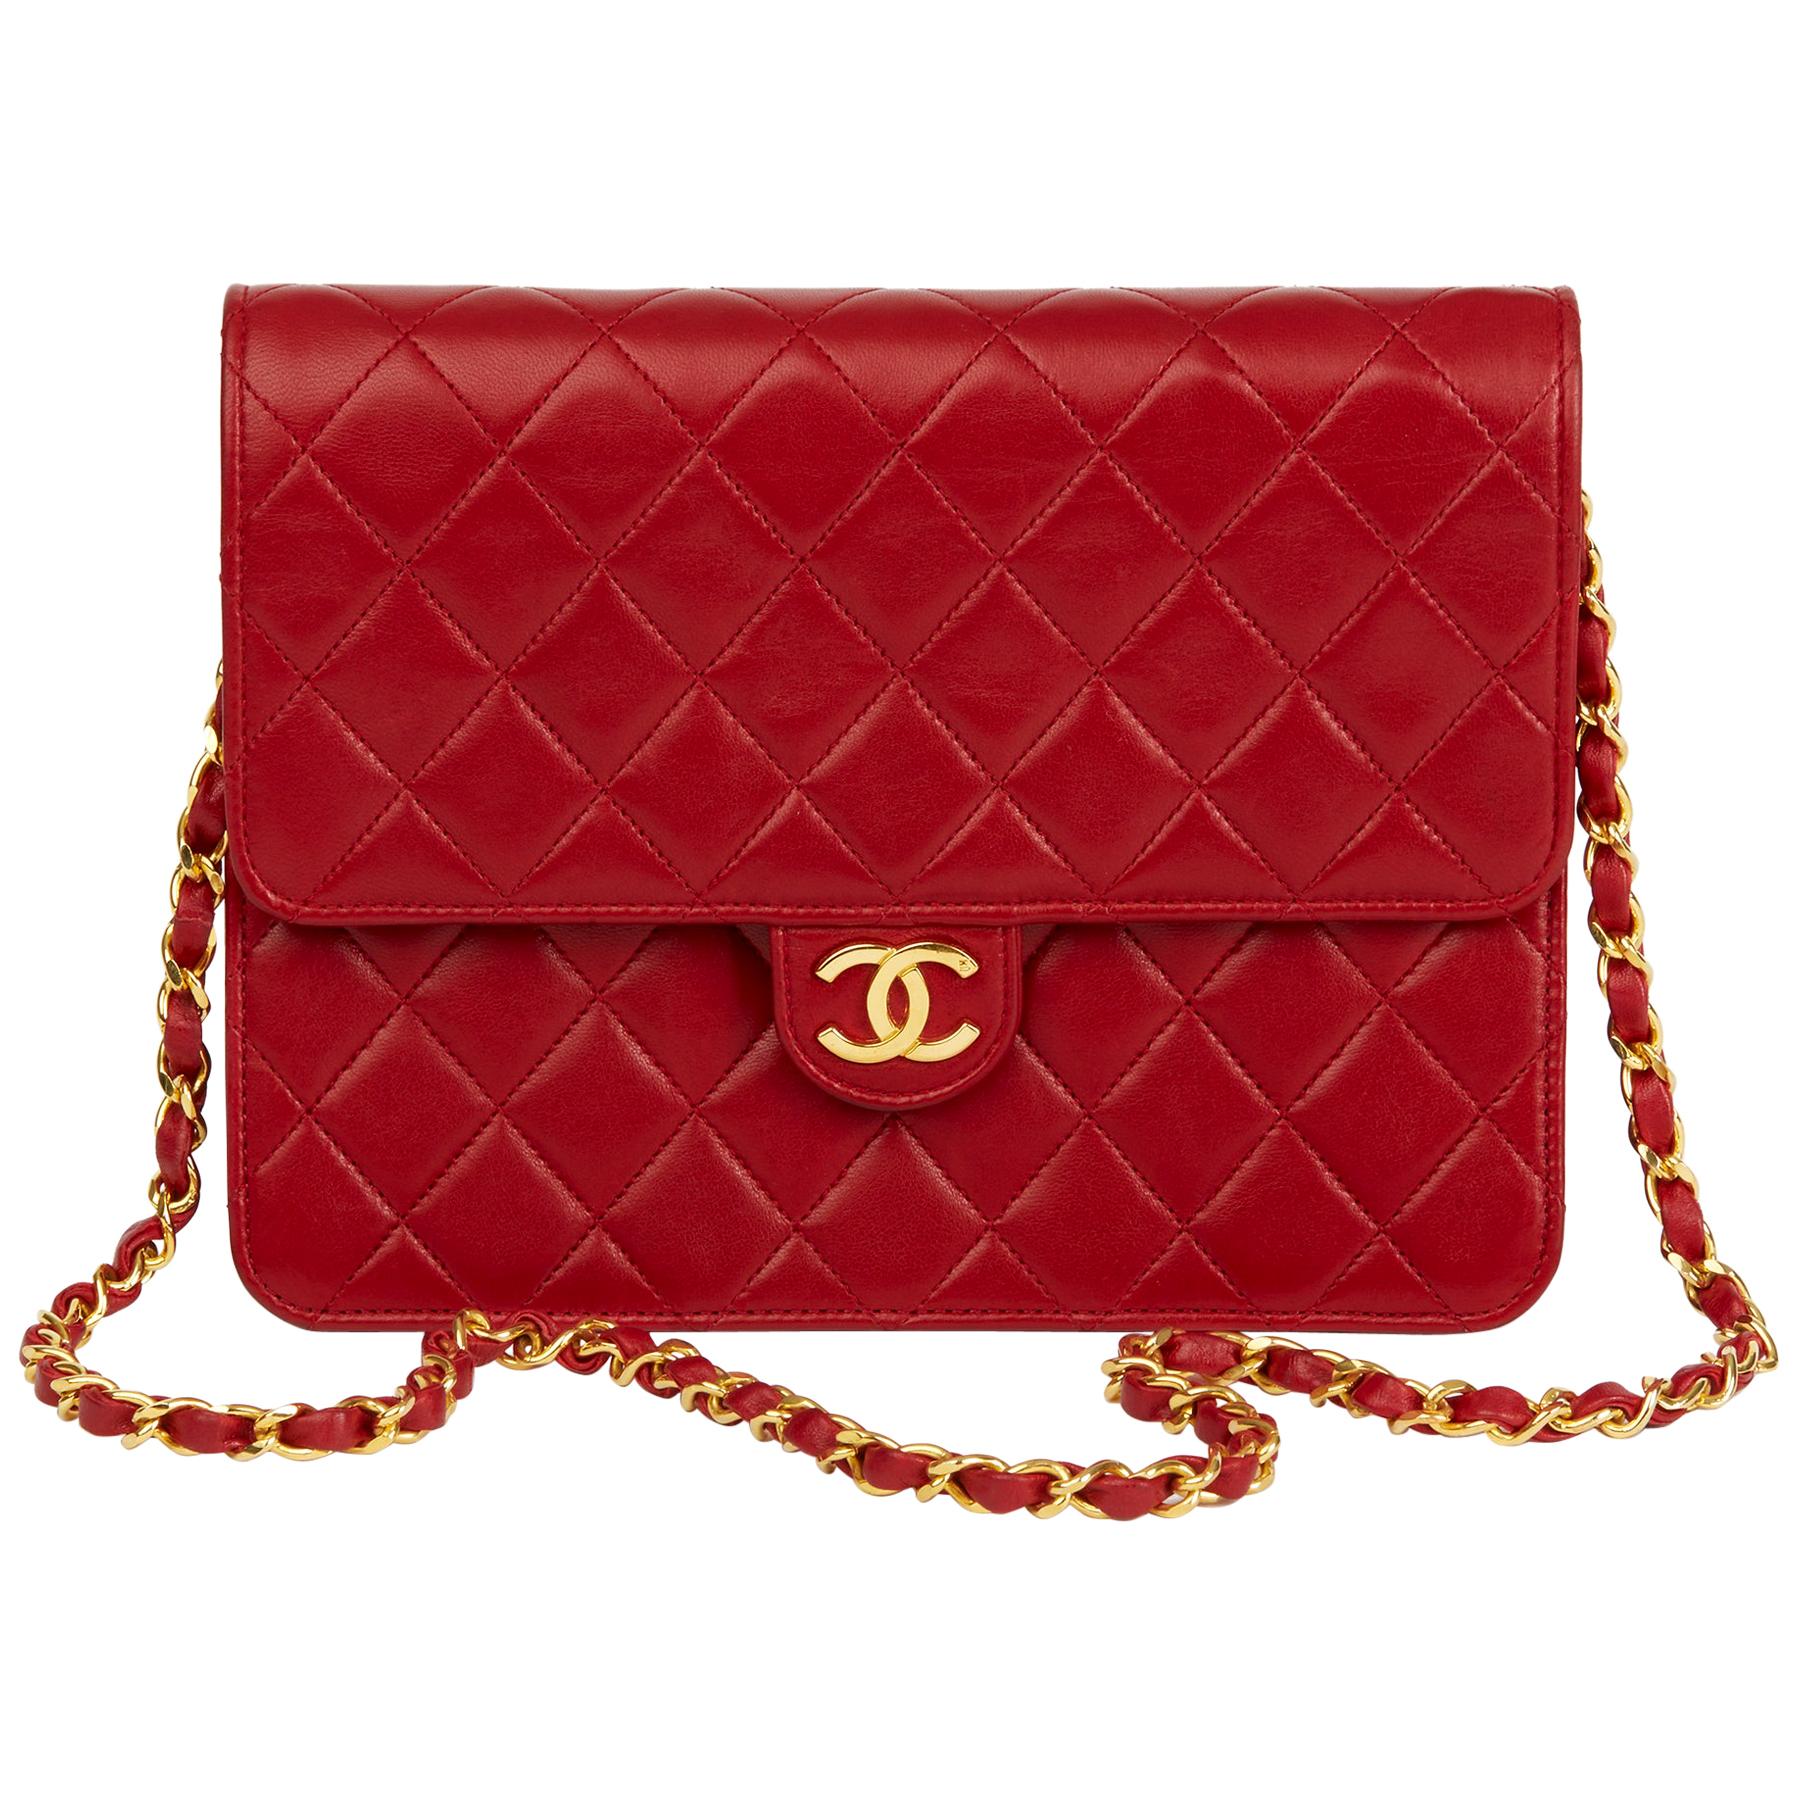 1990 Chanel Red Quilted Lambskin Vintage Small Classic Single Flap Bag